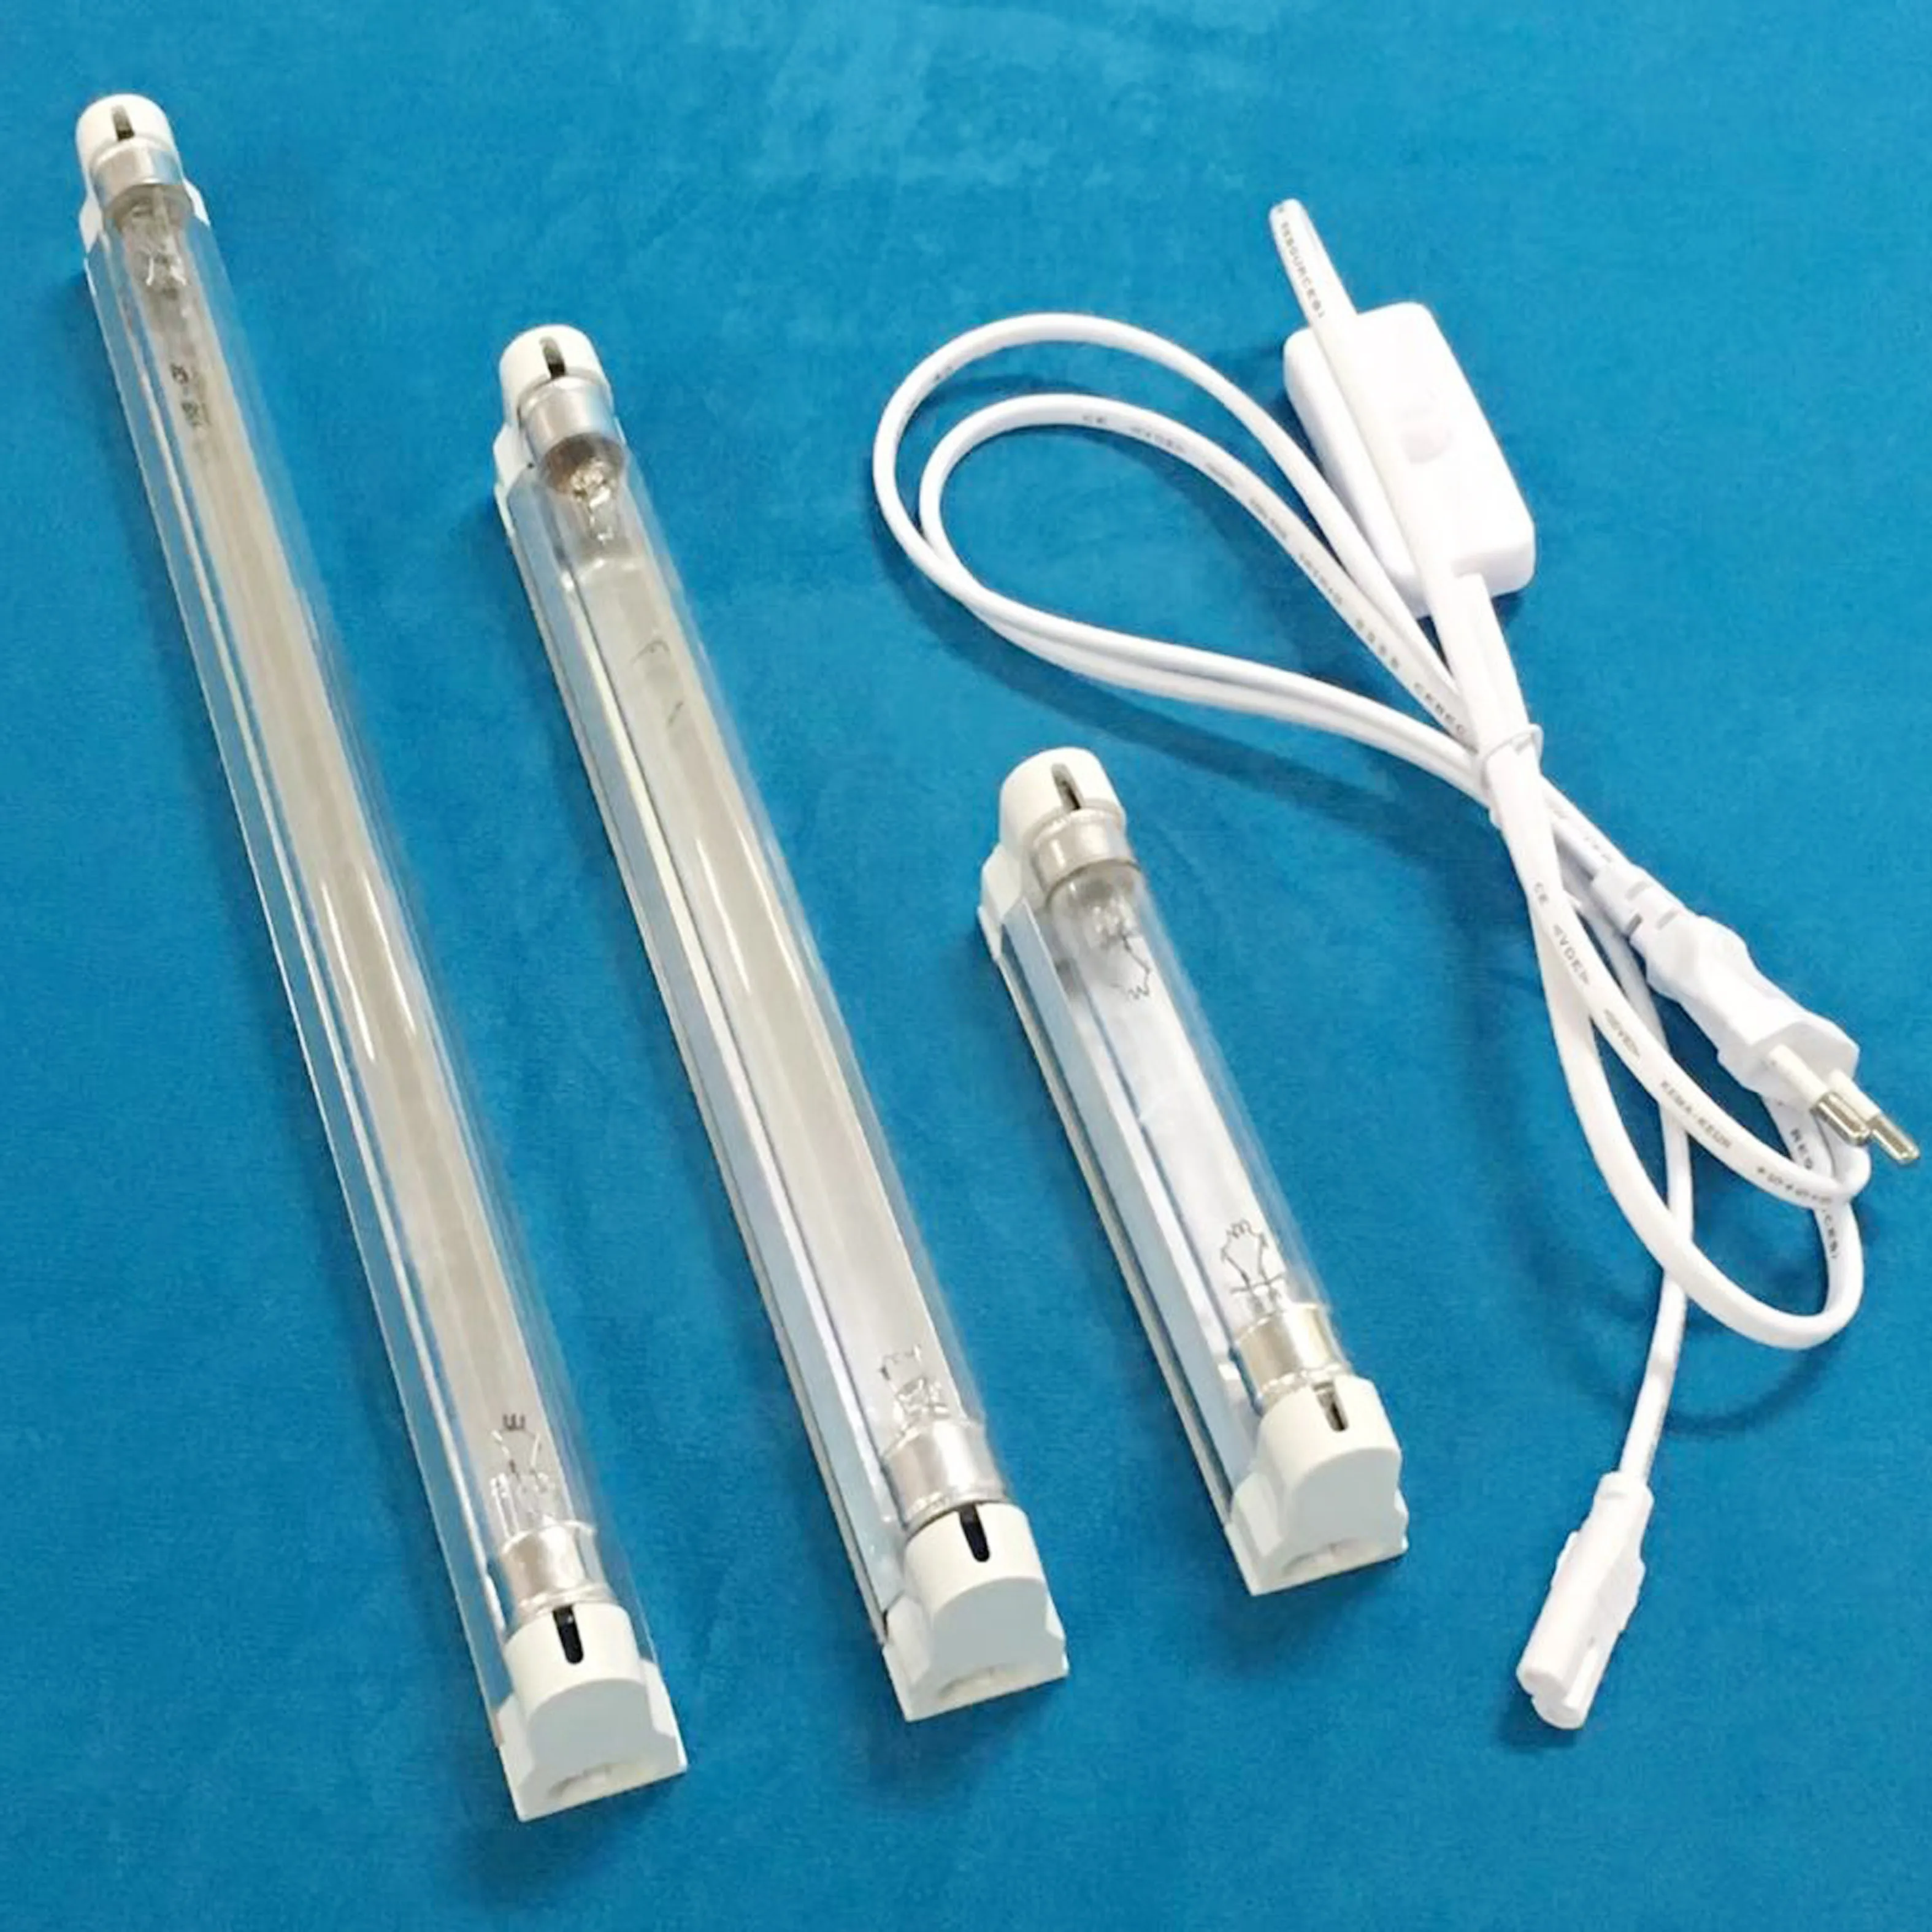 Ultraviolet Germicidal Light T5 Tube UVC LED Disinfection Sterilizer Kill Dust Mite UV Lamp with Fixture For Bedroom Hospital